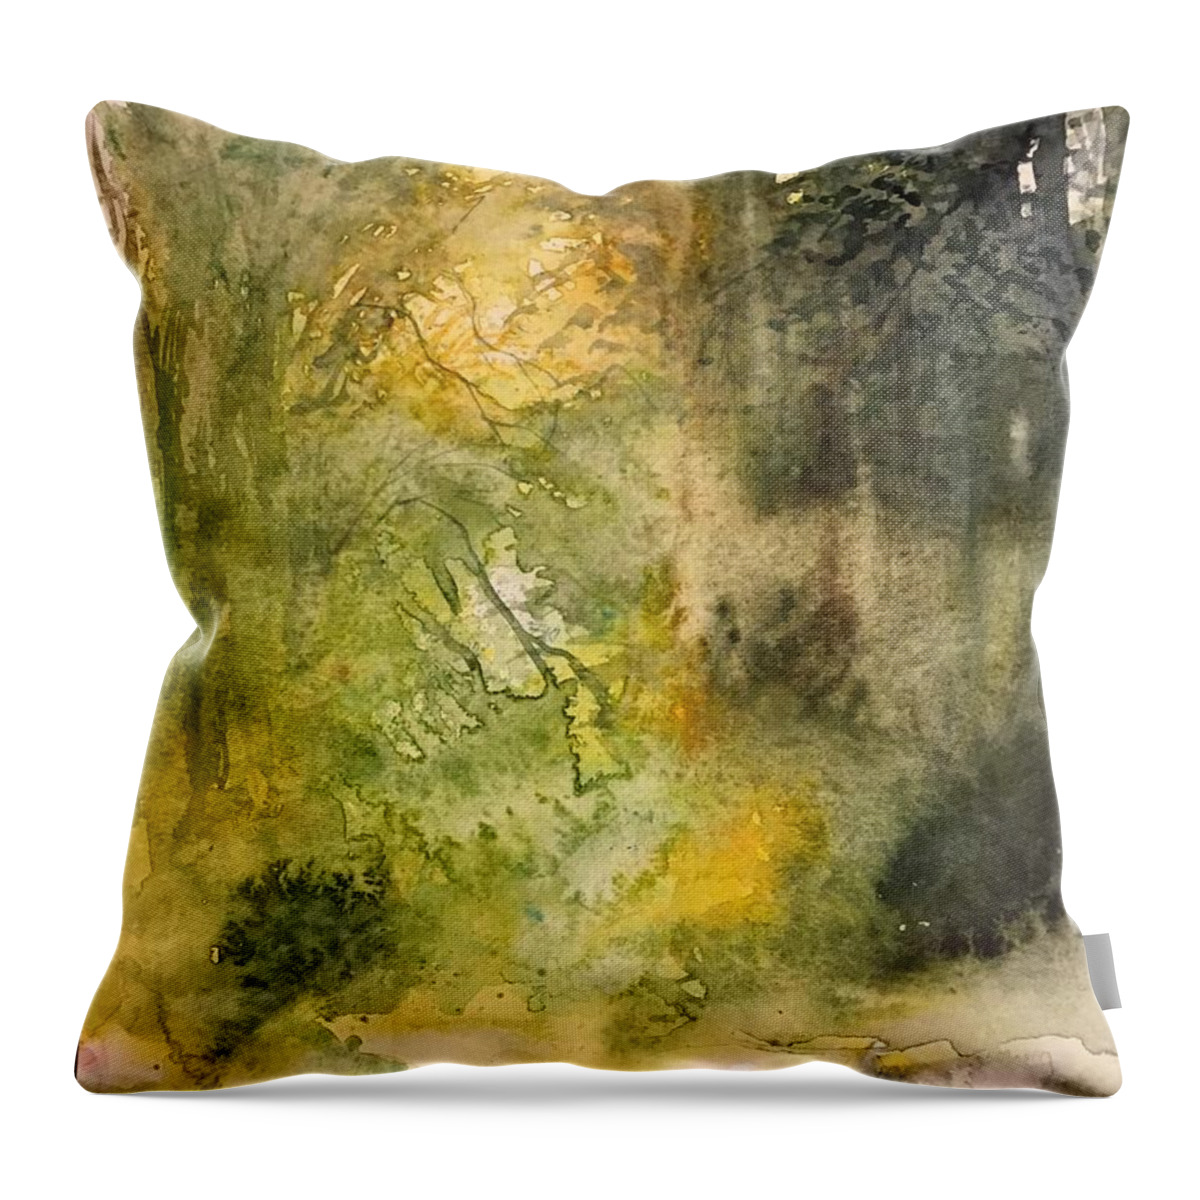 The Forest With River Throw Pillow featuring the painting 1052014 by Han in Huang wong